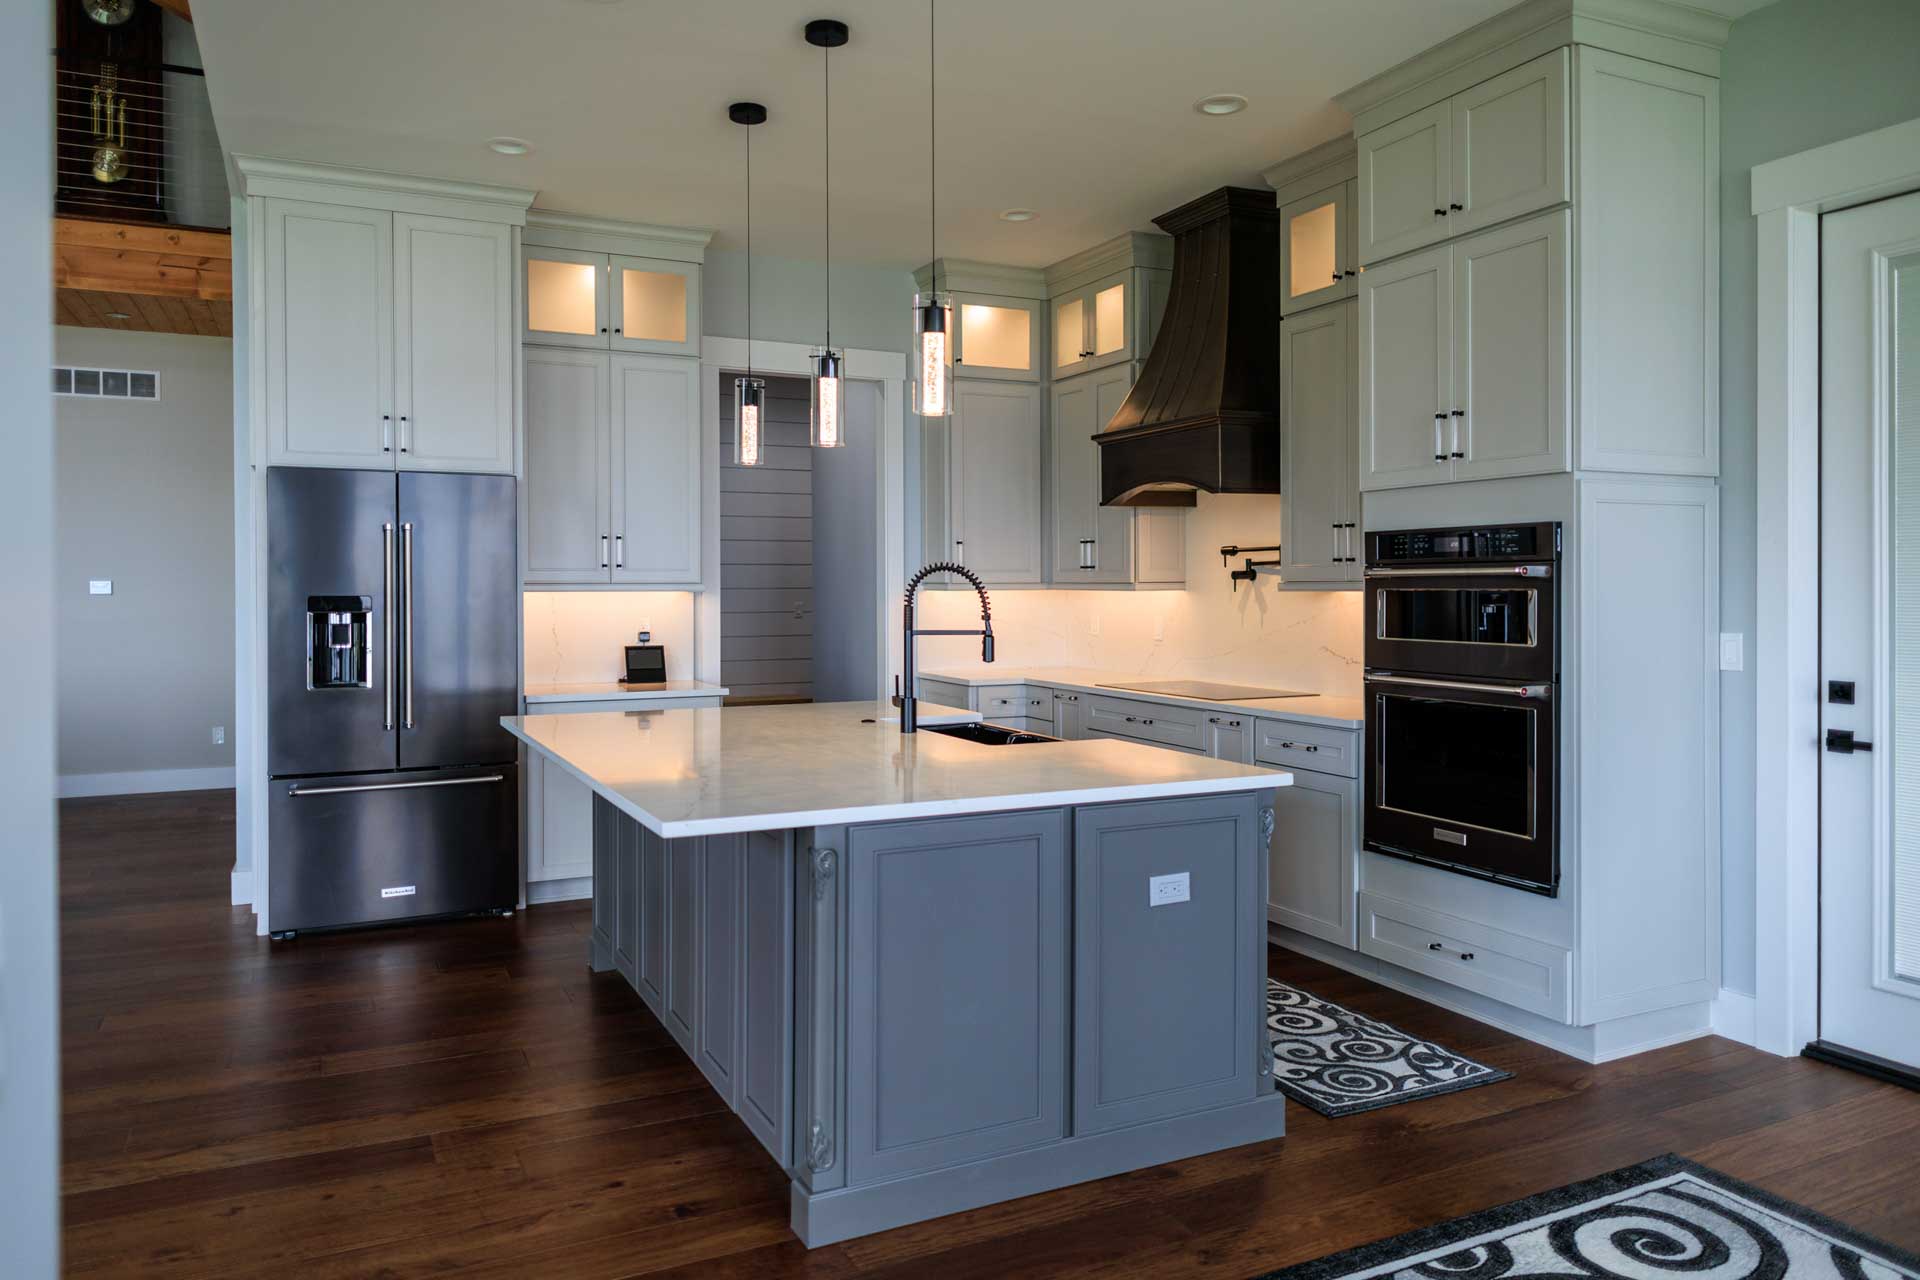 Woodline Building Company Modern Lakefront Lake Nepessing Lapeer, Michigan Kitchen with Grey Cabinets